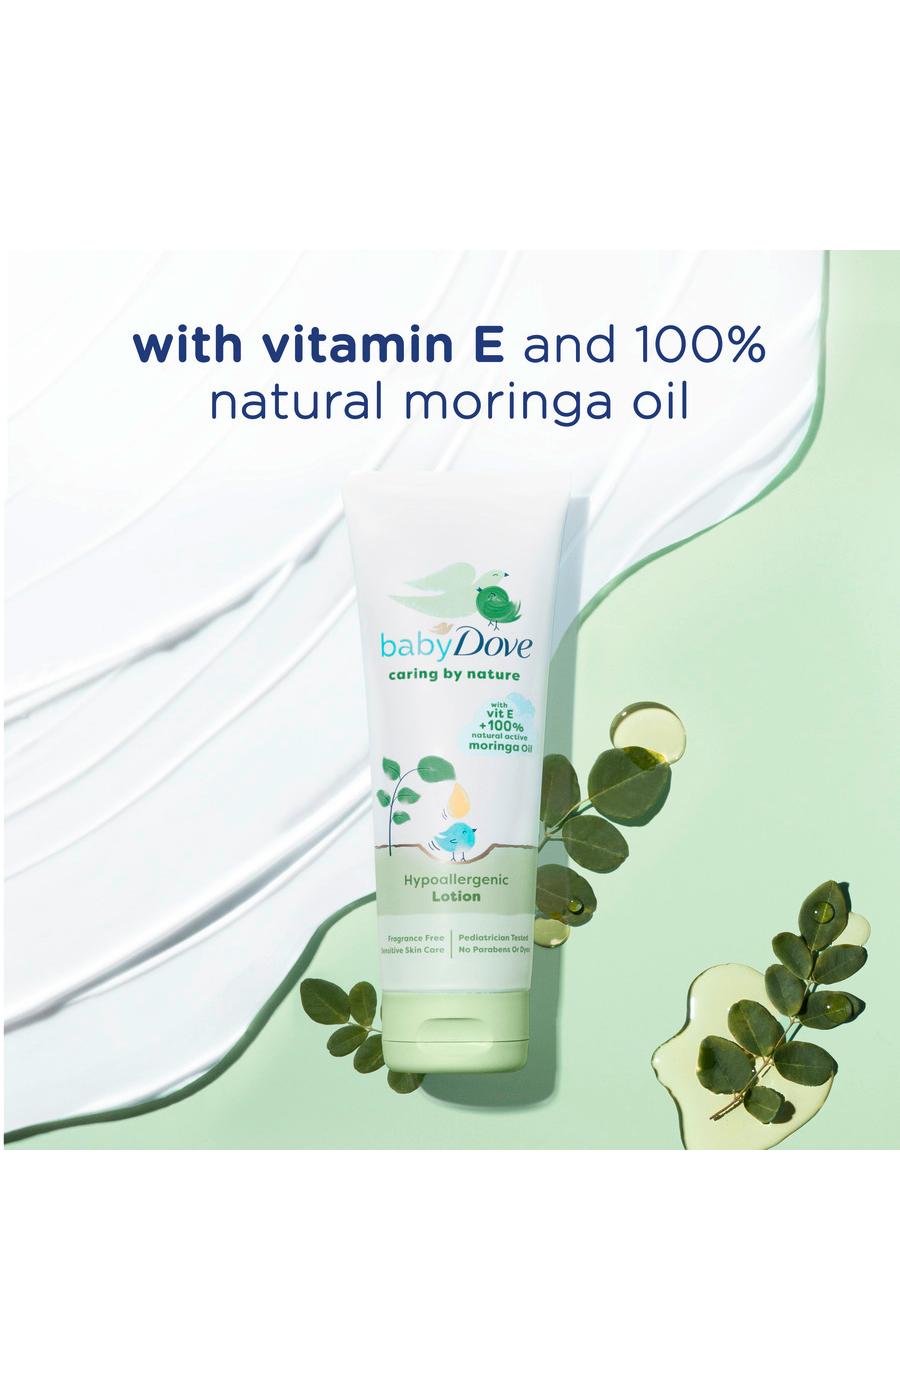 Baby Dove Hypoallergenic Lotion with Vitamin E and 100% Natural Moringa Oil; image 2 of 5